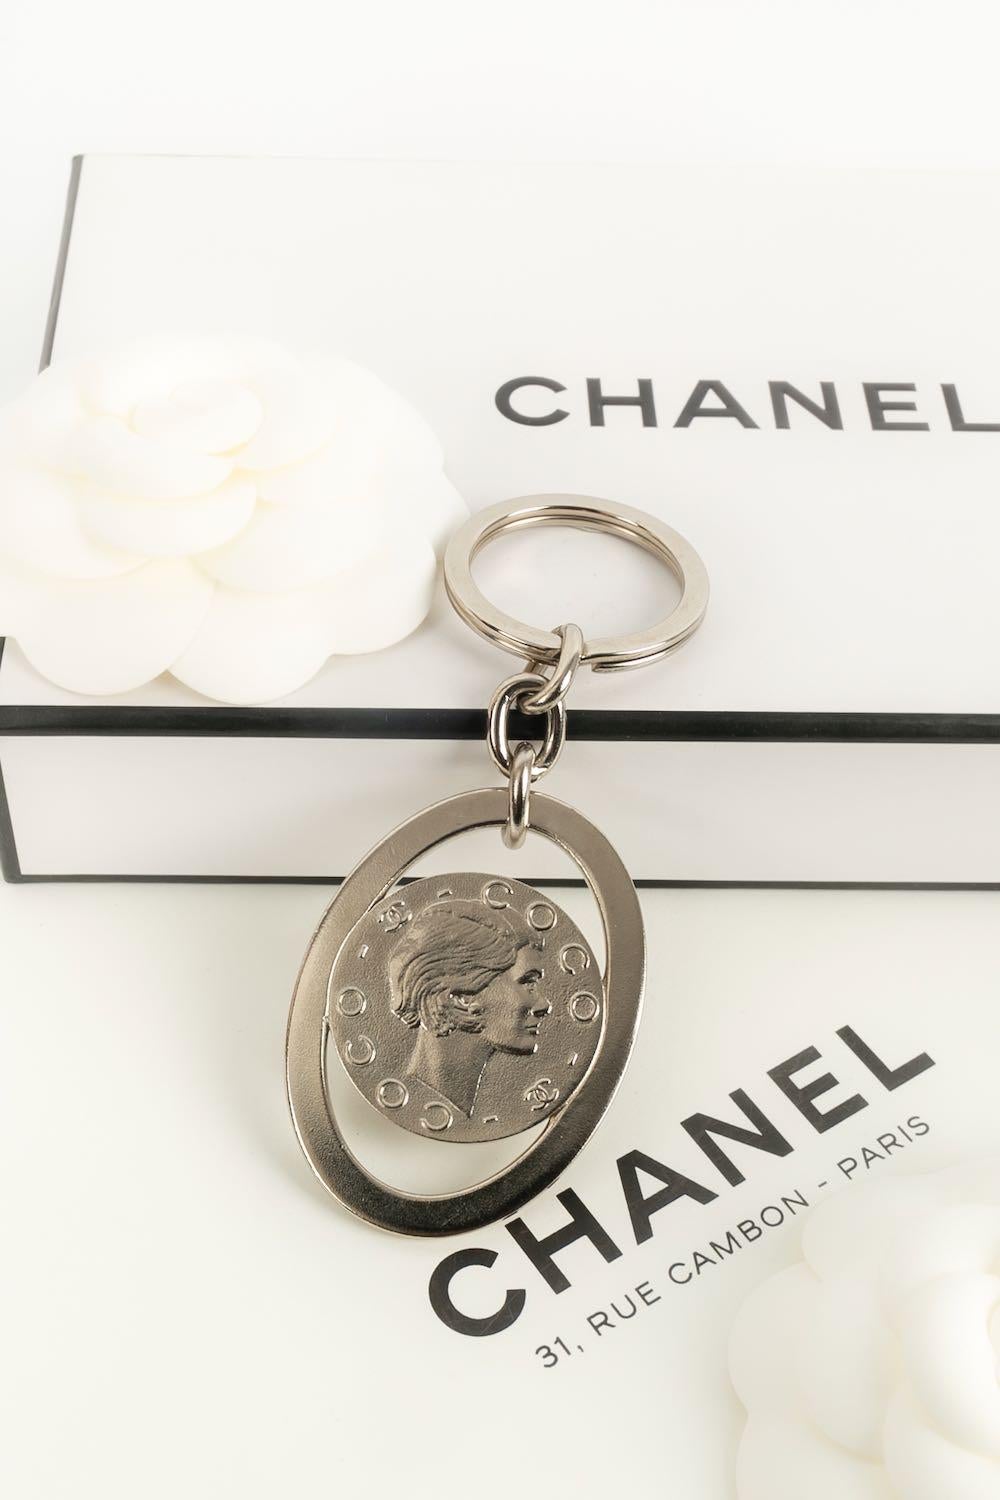 Chanel - Silver metal key ring

Additional information: 

Dimensions: 
Height: 10 cm

Condition: 
Very good condition

Seller Ref number: BRB11